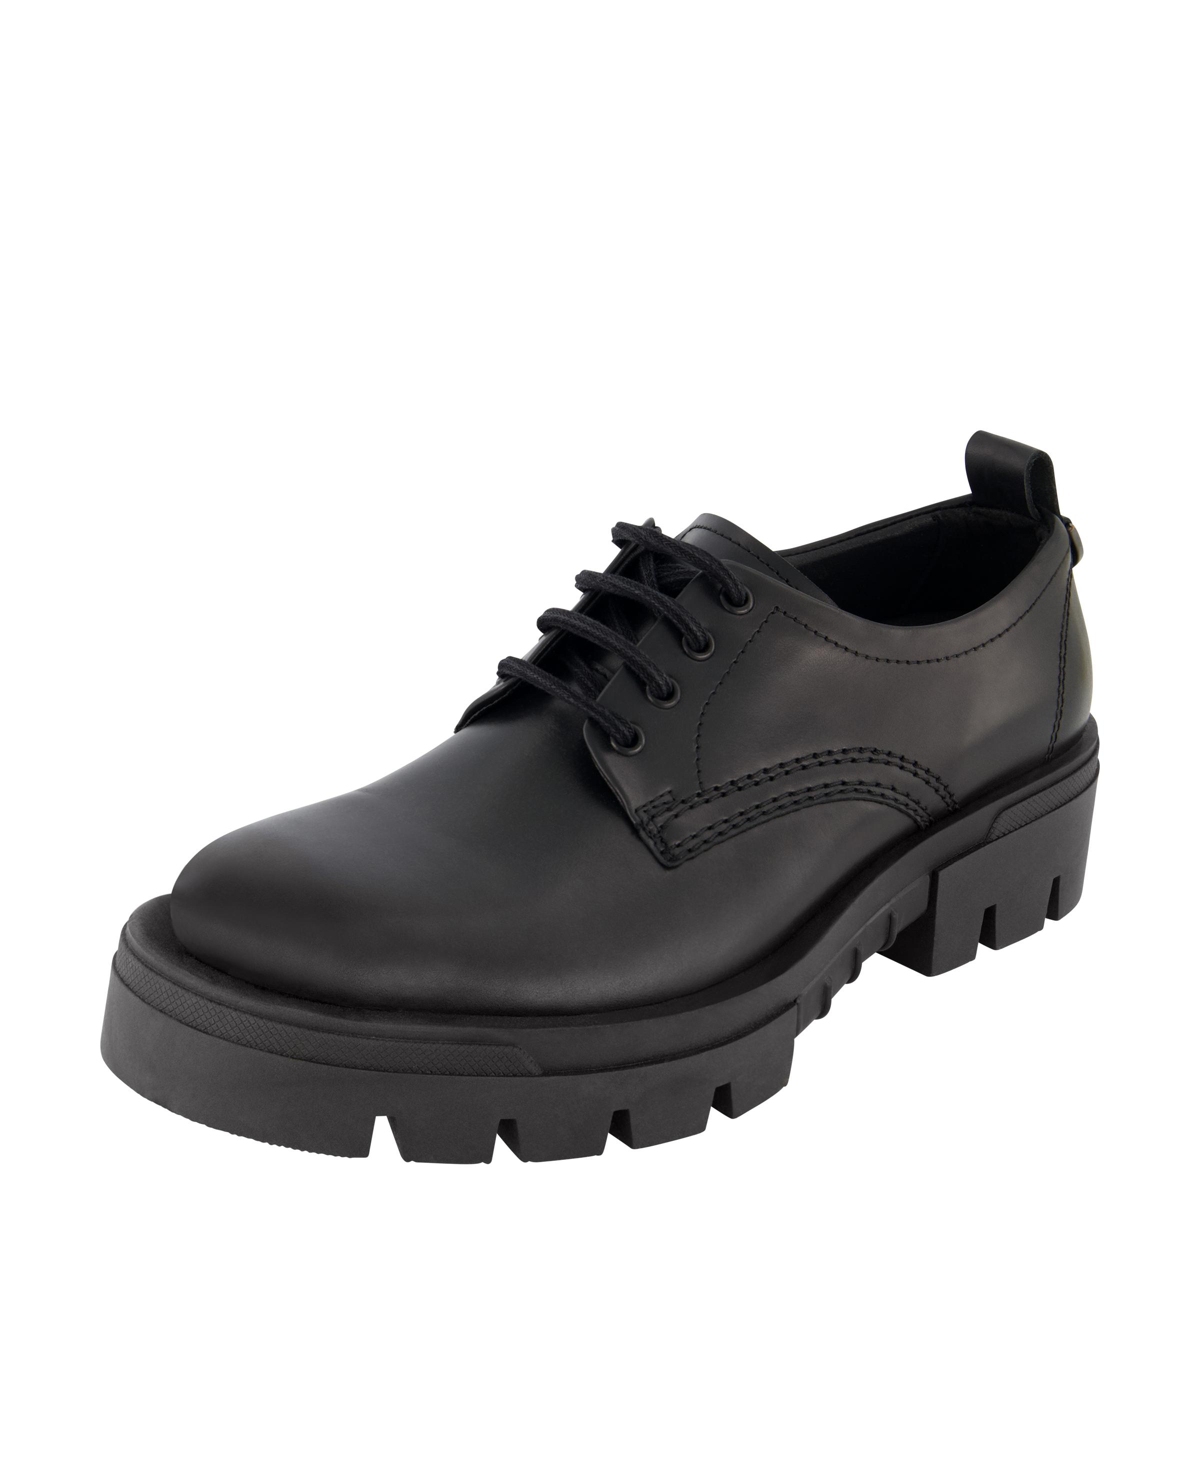 Karl Lagerfeld Men's White Label Leather Plain Toe Derby On Lug Sole Shoes In Black